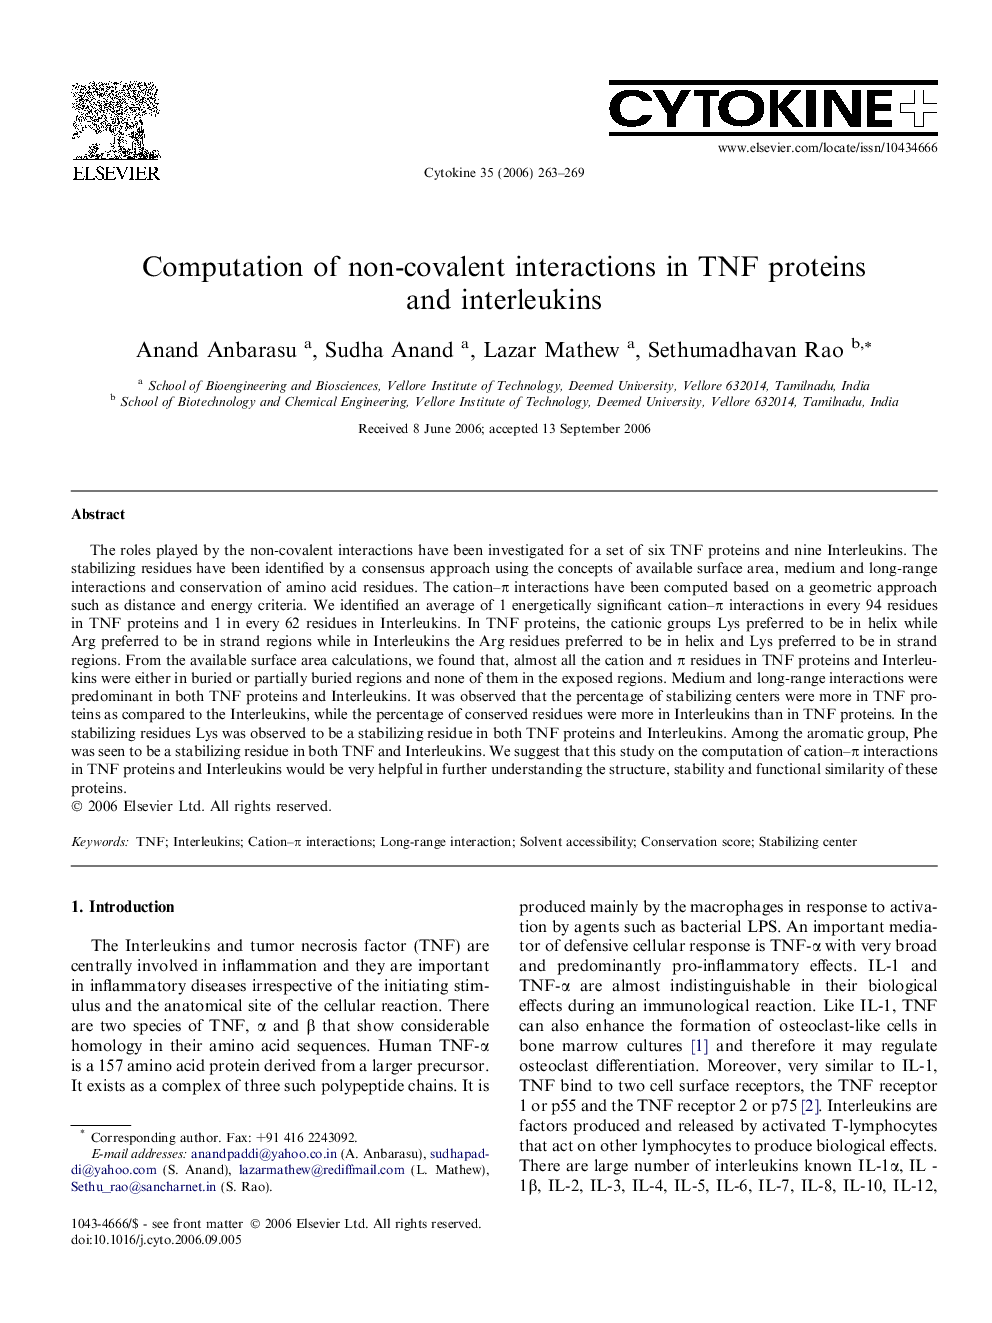 Computation of non-covalent interactions in TNF proteins and interleukins